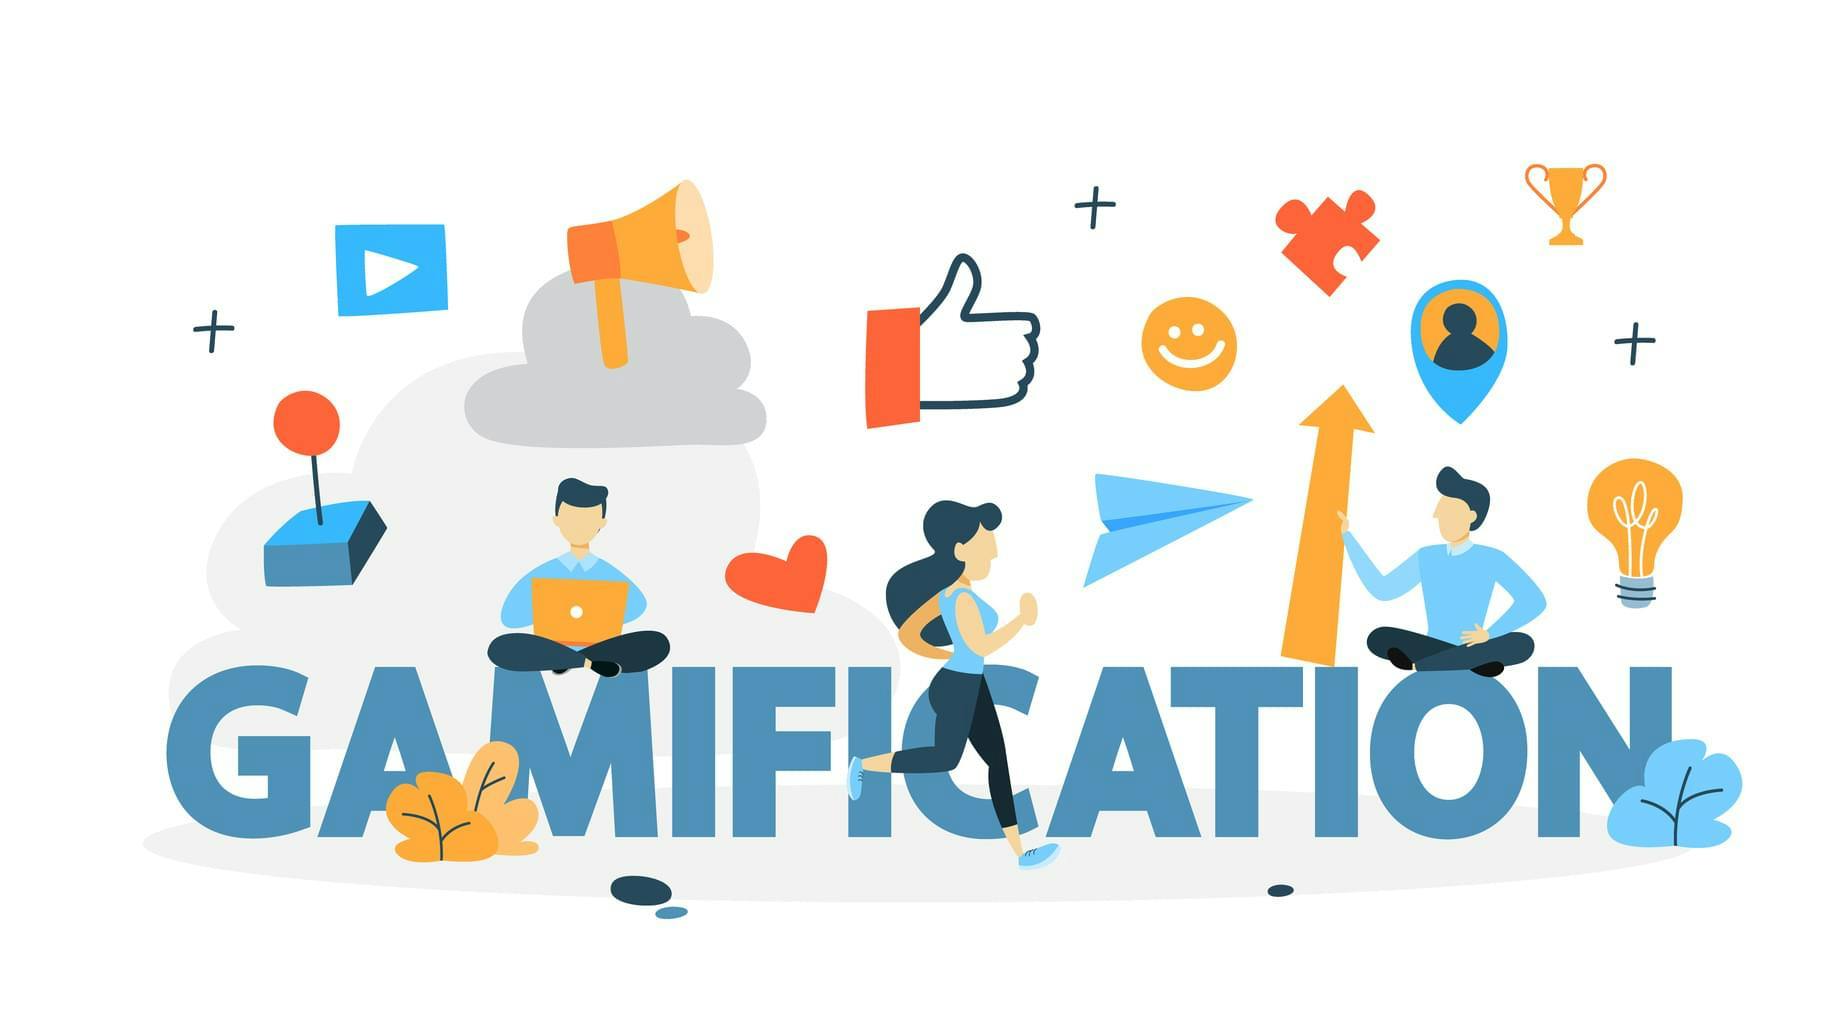 What you need to know about gamification and why